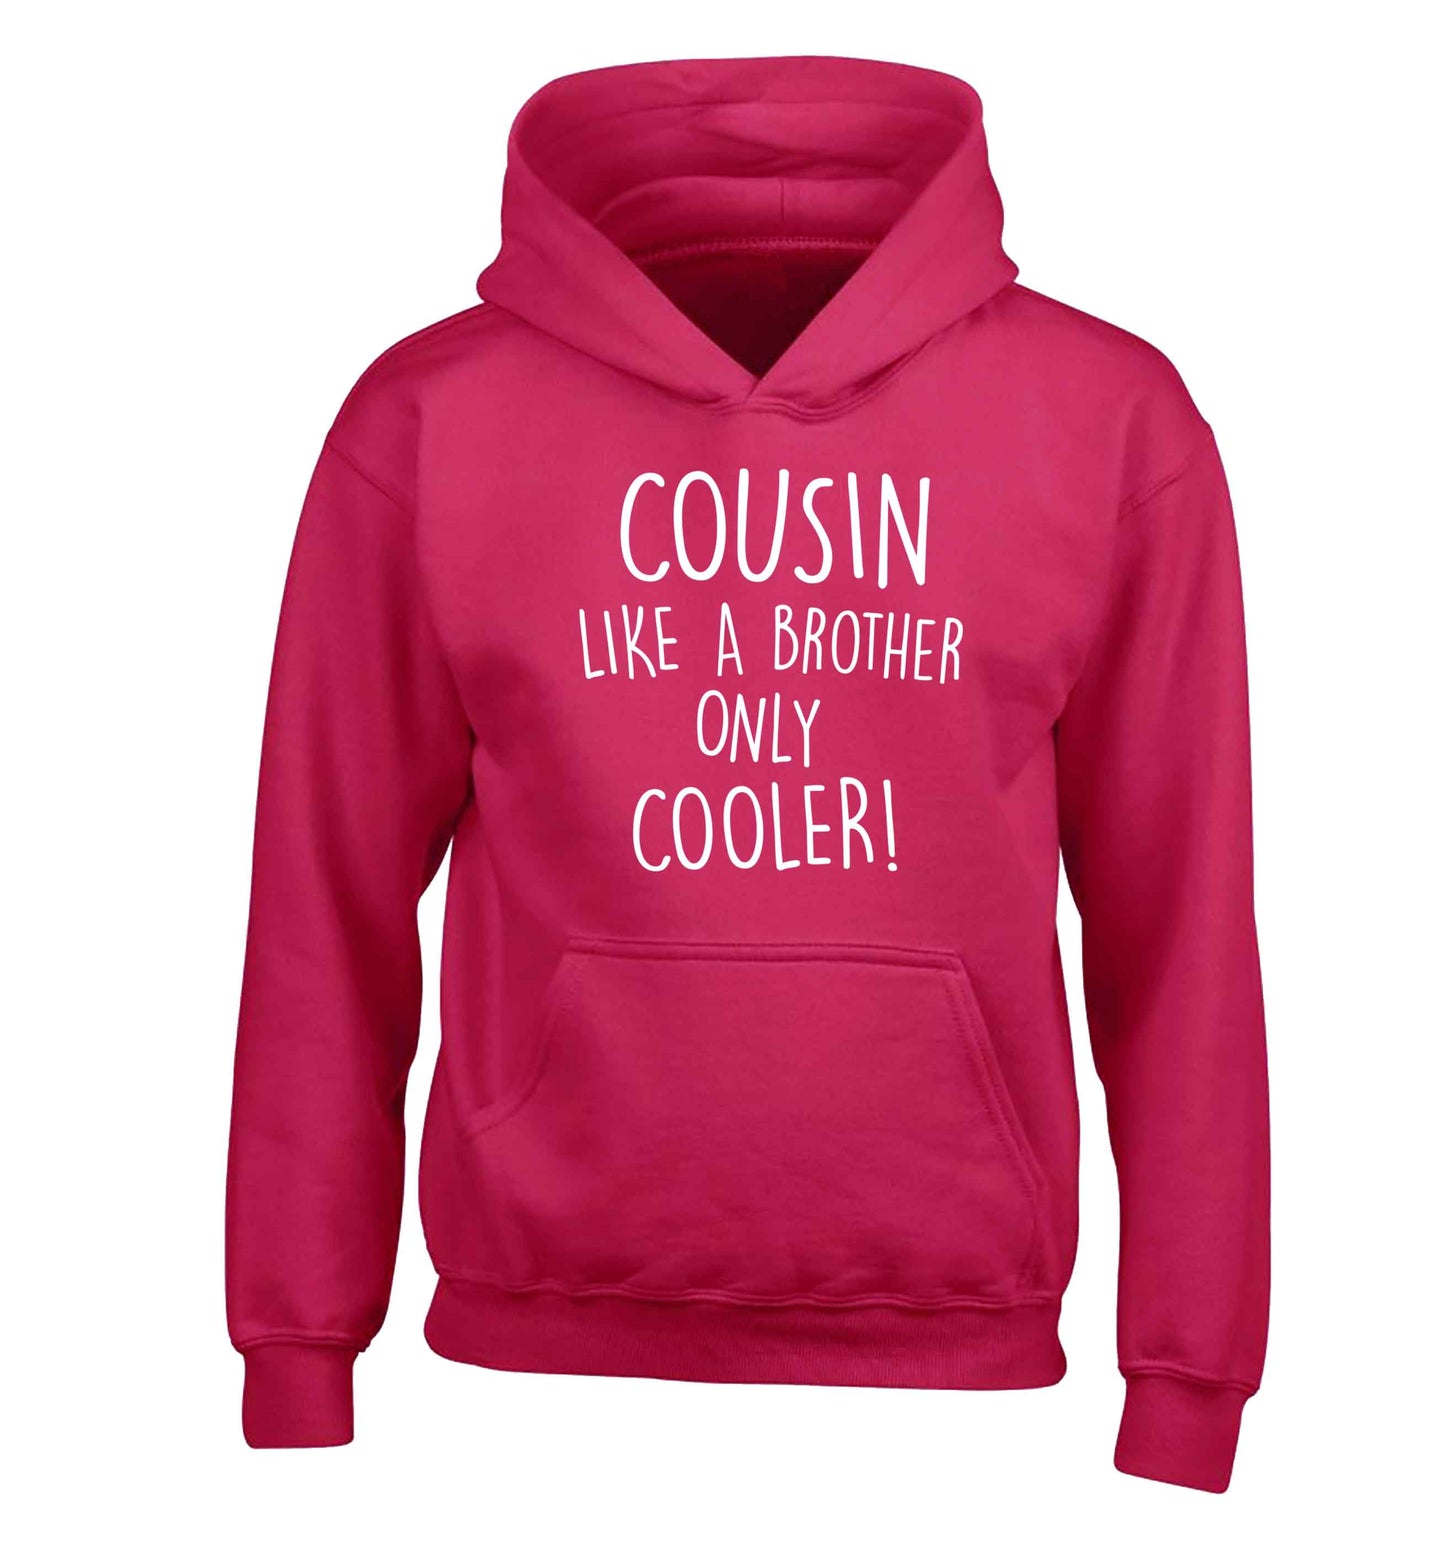 Cousin like a brother only cooler children's pink hoodie 12-13 Years